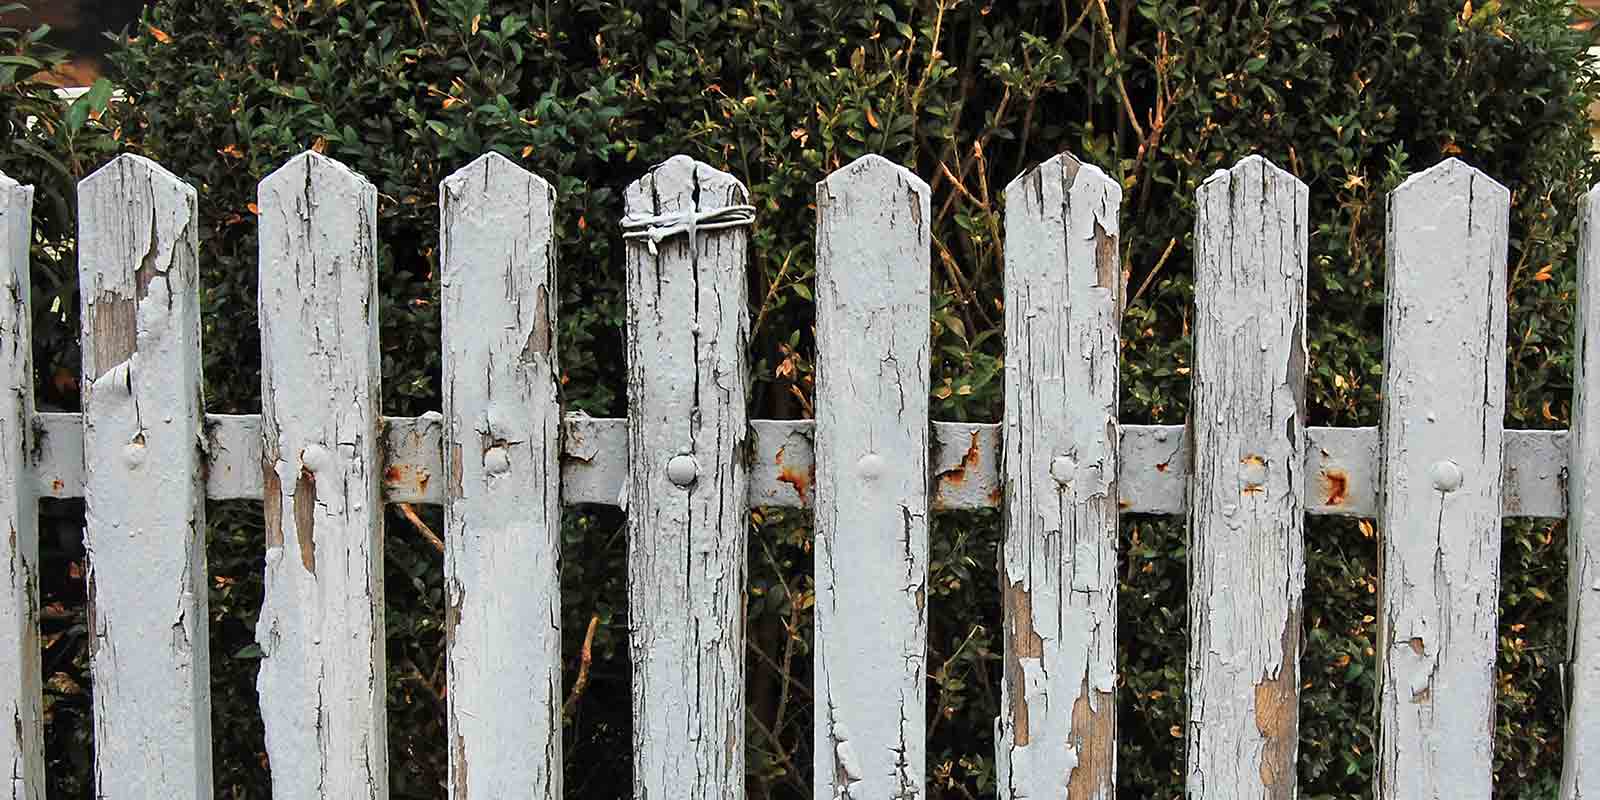 Replace the old rotting wood fence